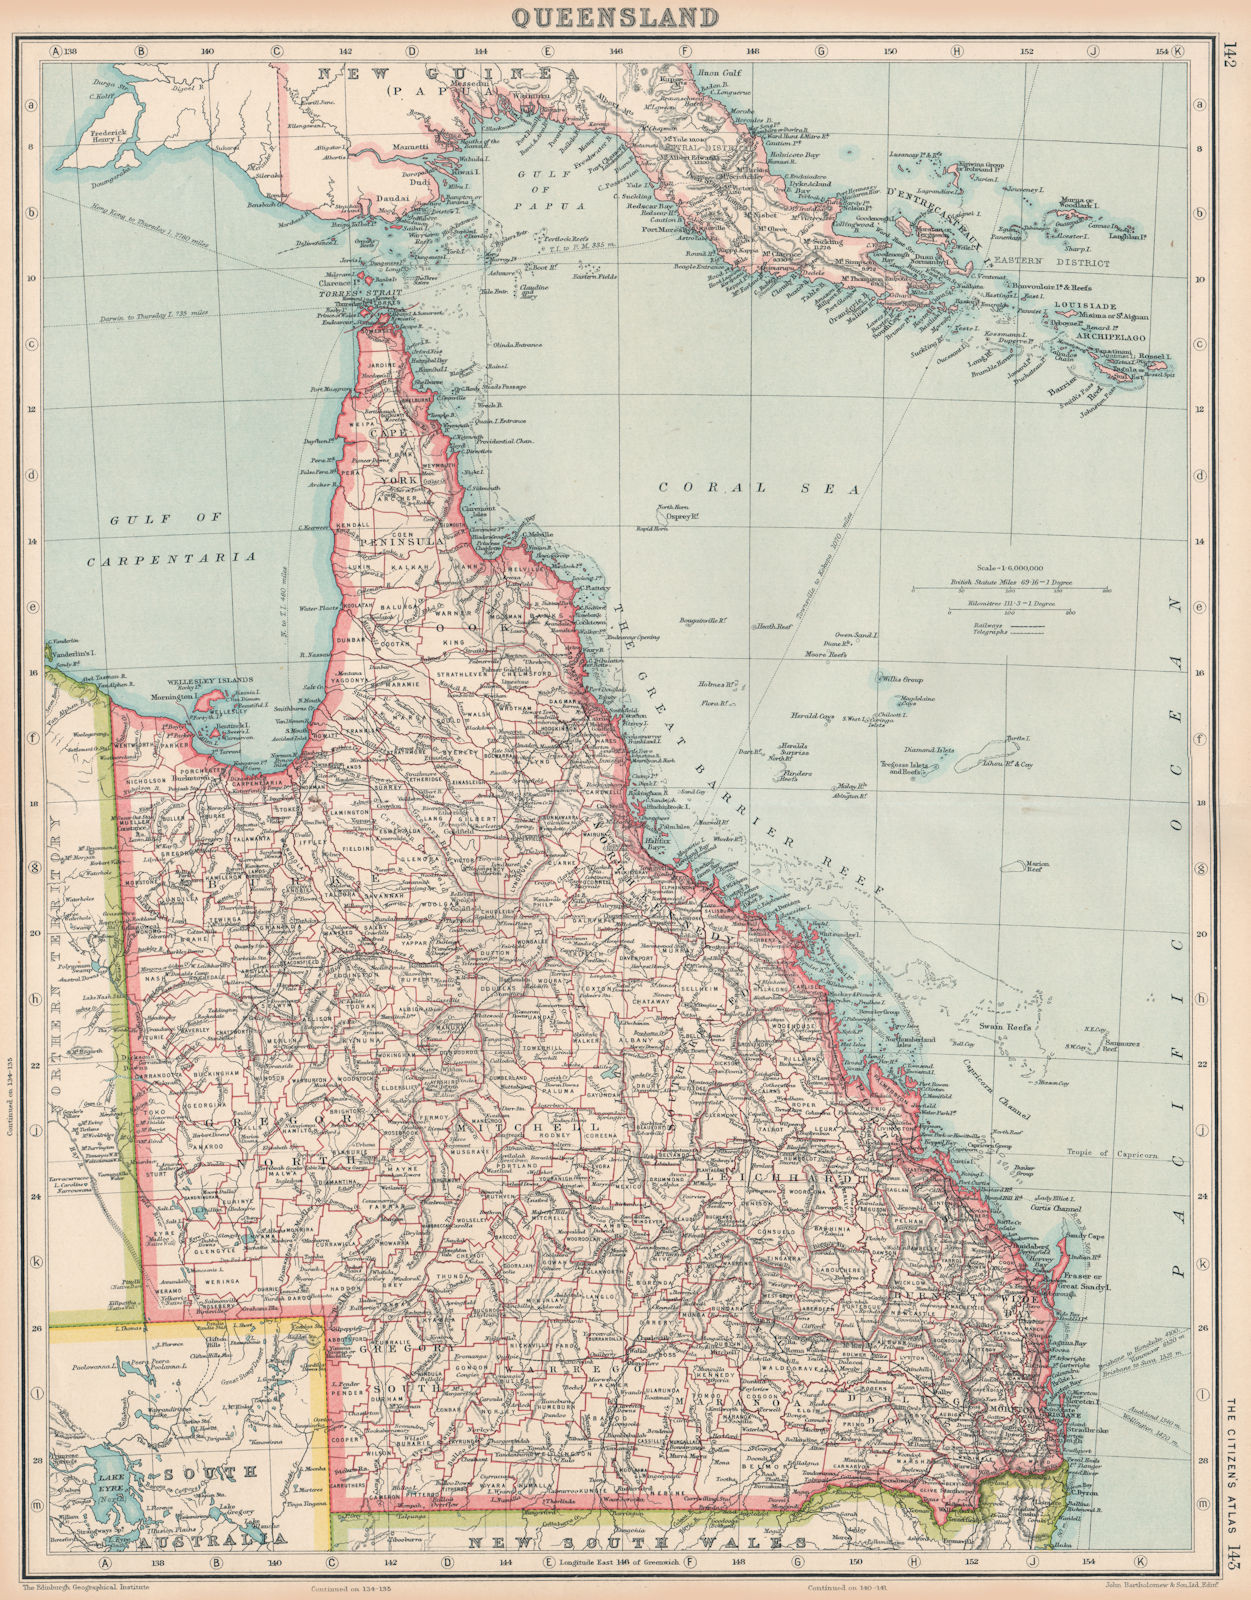 QUEENSLAND. State map showing counties. Australia. BARTHOLOMEW 1924 old